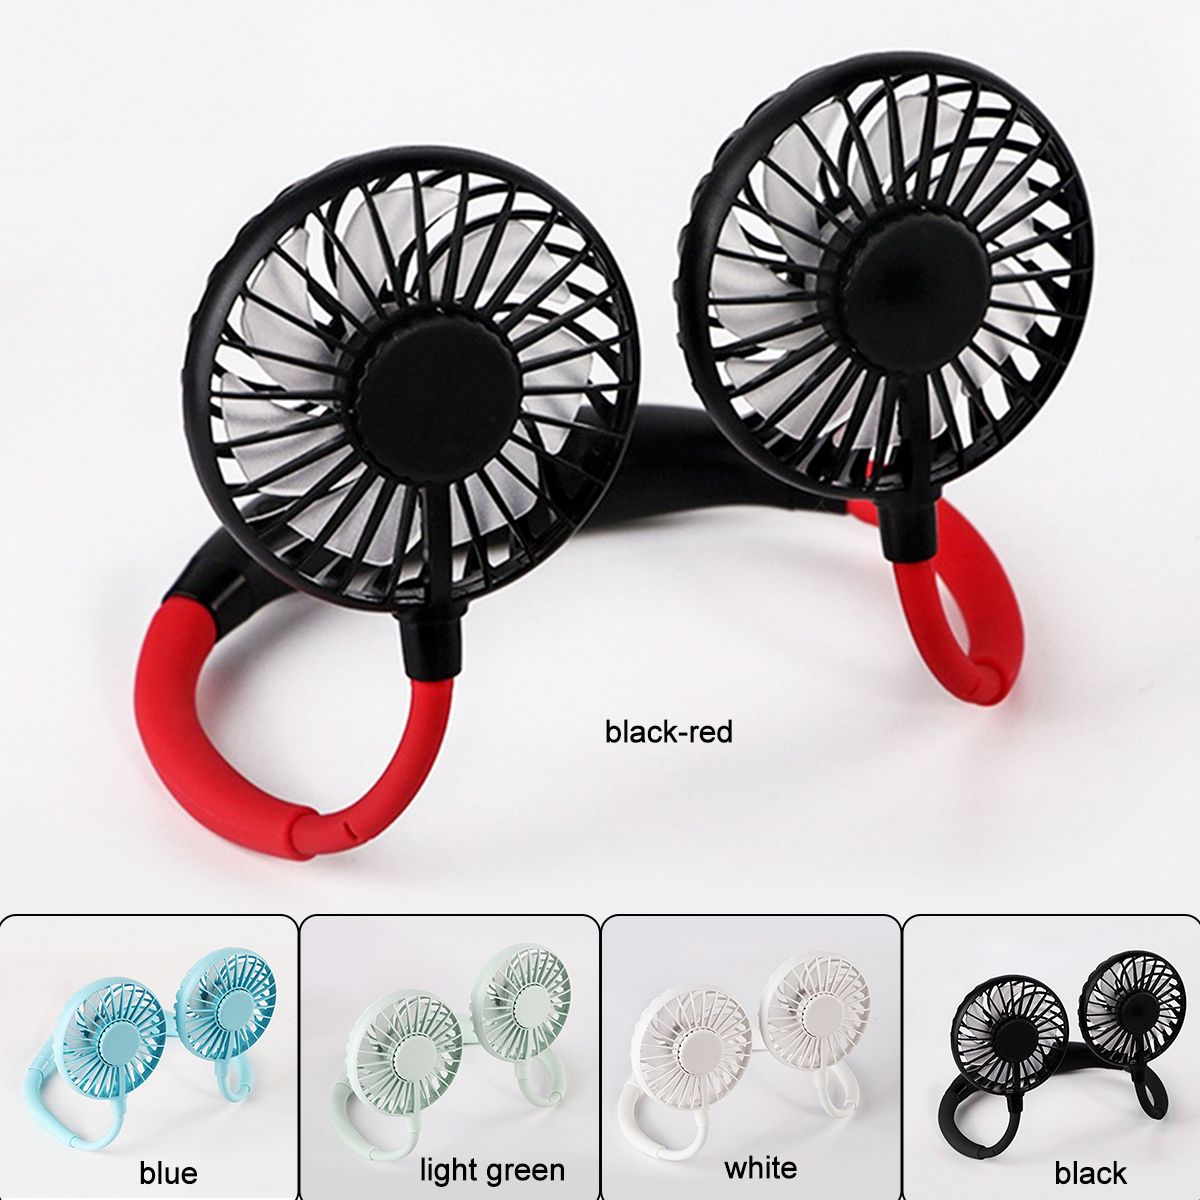 1200mah-3-Gear-LED-USB-Rechargeable-Portable-Hanging-Neck-Fan-Rechargeable-Aromatherapy-Cooling-Fan--1716094